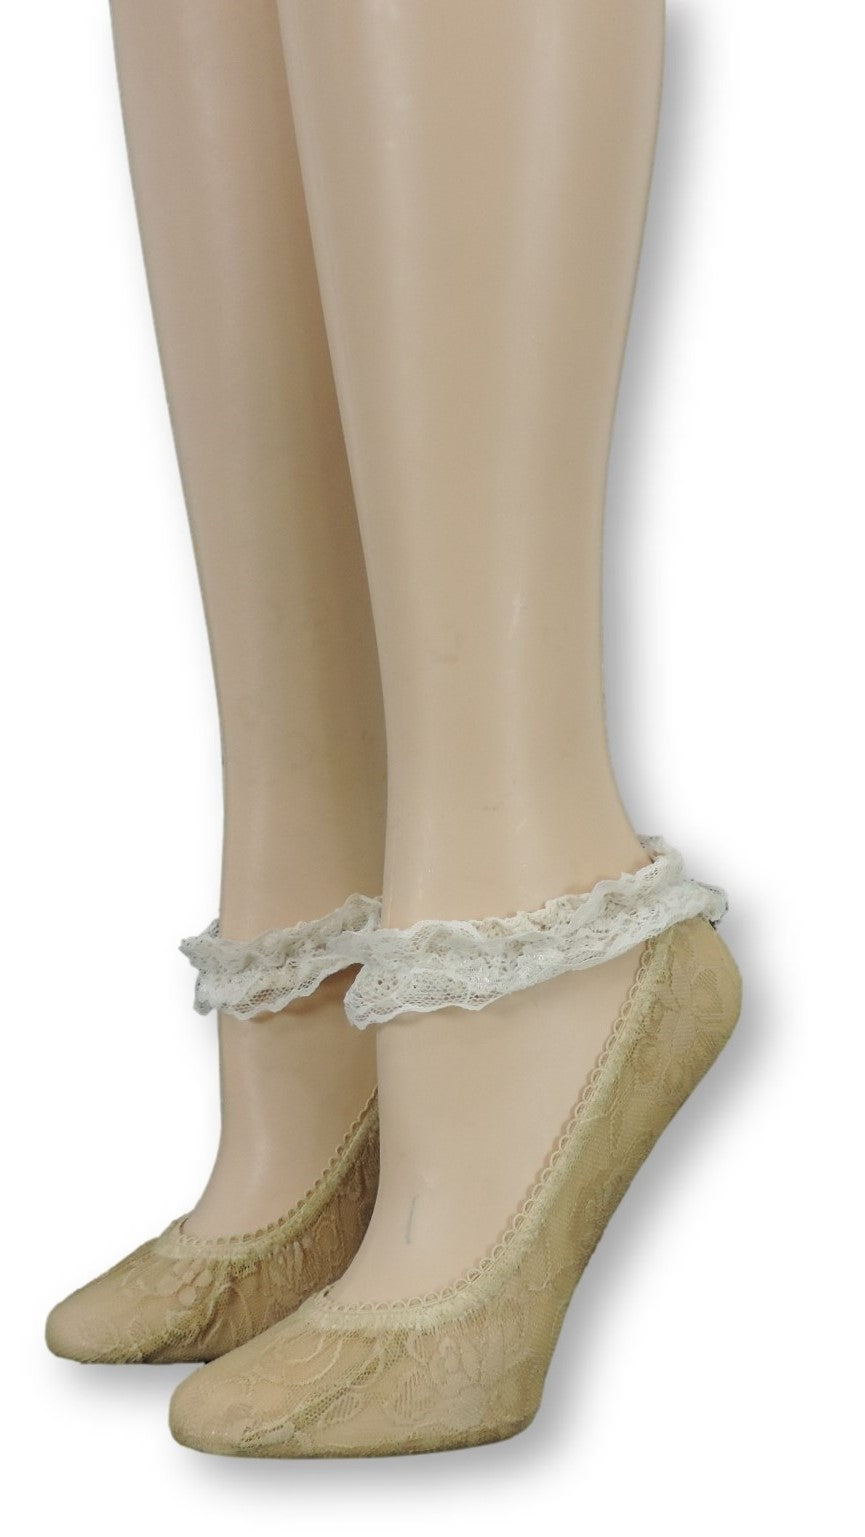 Golden Ankle Mesh Socks with Antique Lace - Global Trendz Fashion®